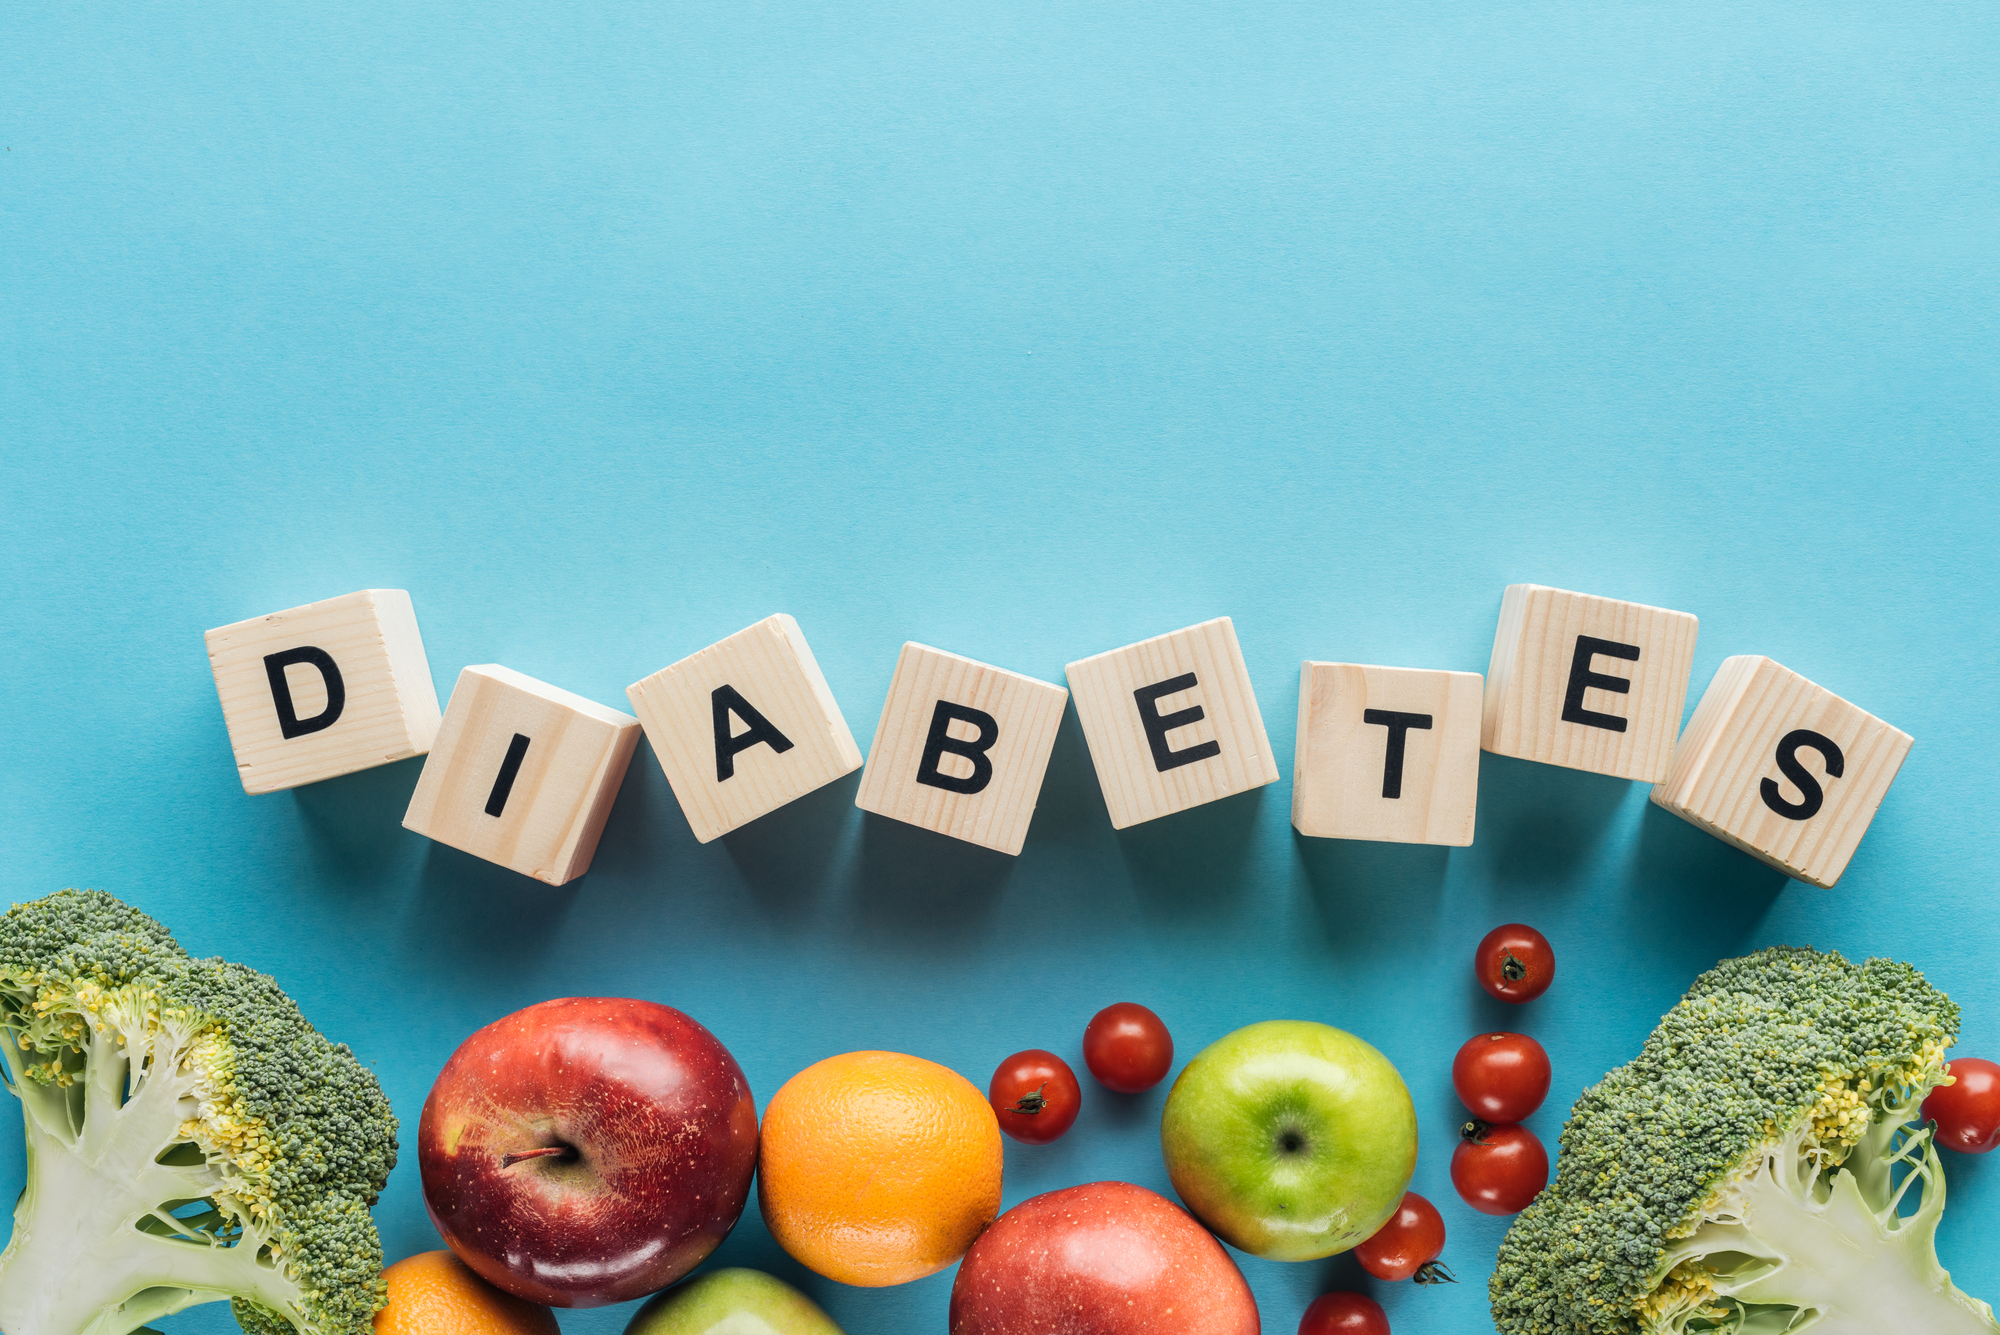 Diabetes: 10 Things You Should Know